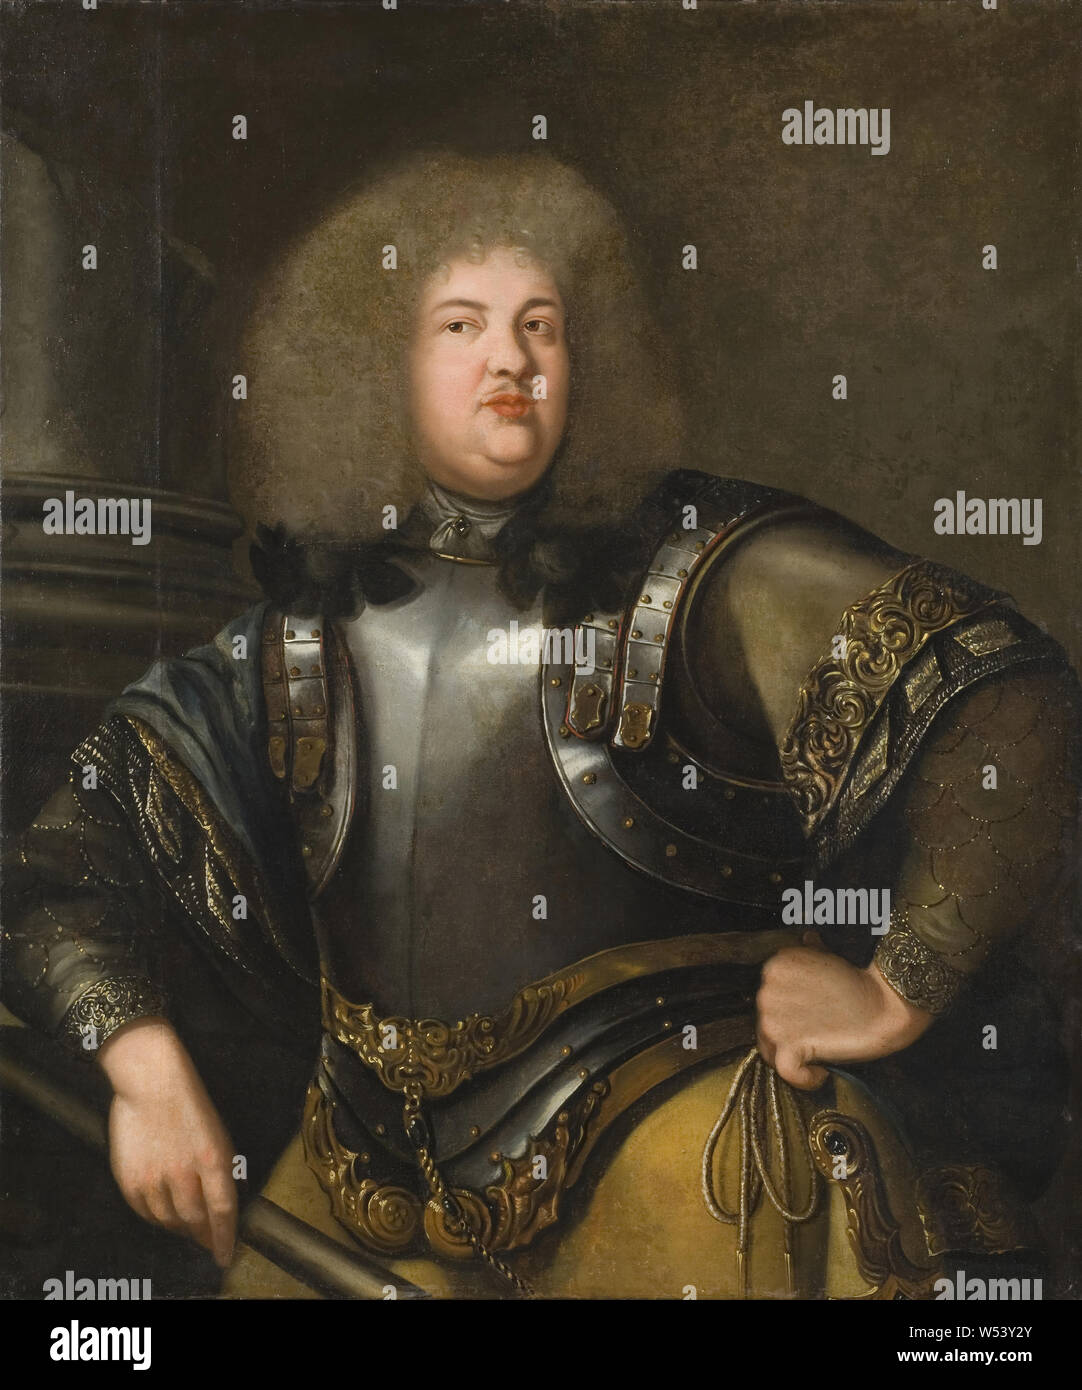 Richard Sylvius, Peter Makeléer, 1644-1697, painting, portrait, 1675, oil on canvas, Height, 107 cm (42.1 inch), Width, 89.5 cm (35.2 inch), Inscription,  Petter Makler top and commendant in Stralsund married to abel Sophi von Plessen dead Barnløse, Son of Hans Makler and other goubers Von Qvickelberg Brother of Chatarina Makler who was first married to chief David Sinclair, and then with general malkom hamilton, with whom she had field marshal hamilton by Bo who was married to falkenberg and then with other flemming Lotta hamilton married to major Lilliehöök of Clastorp Jana hamiltont married Stock Photo